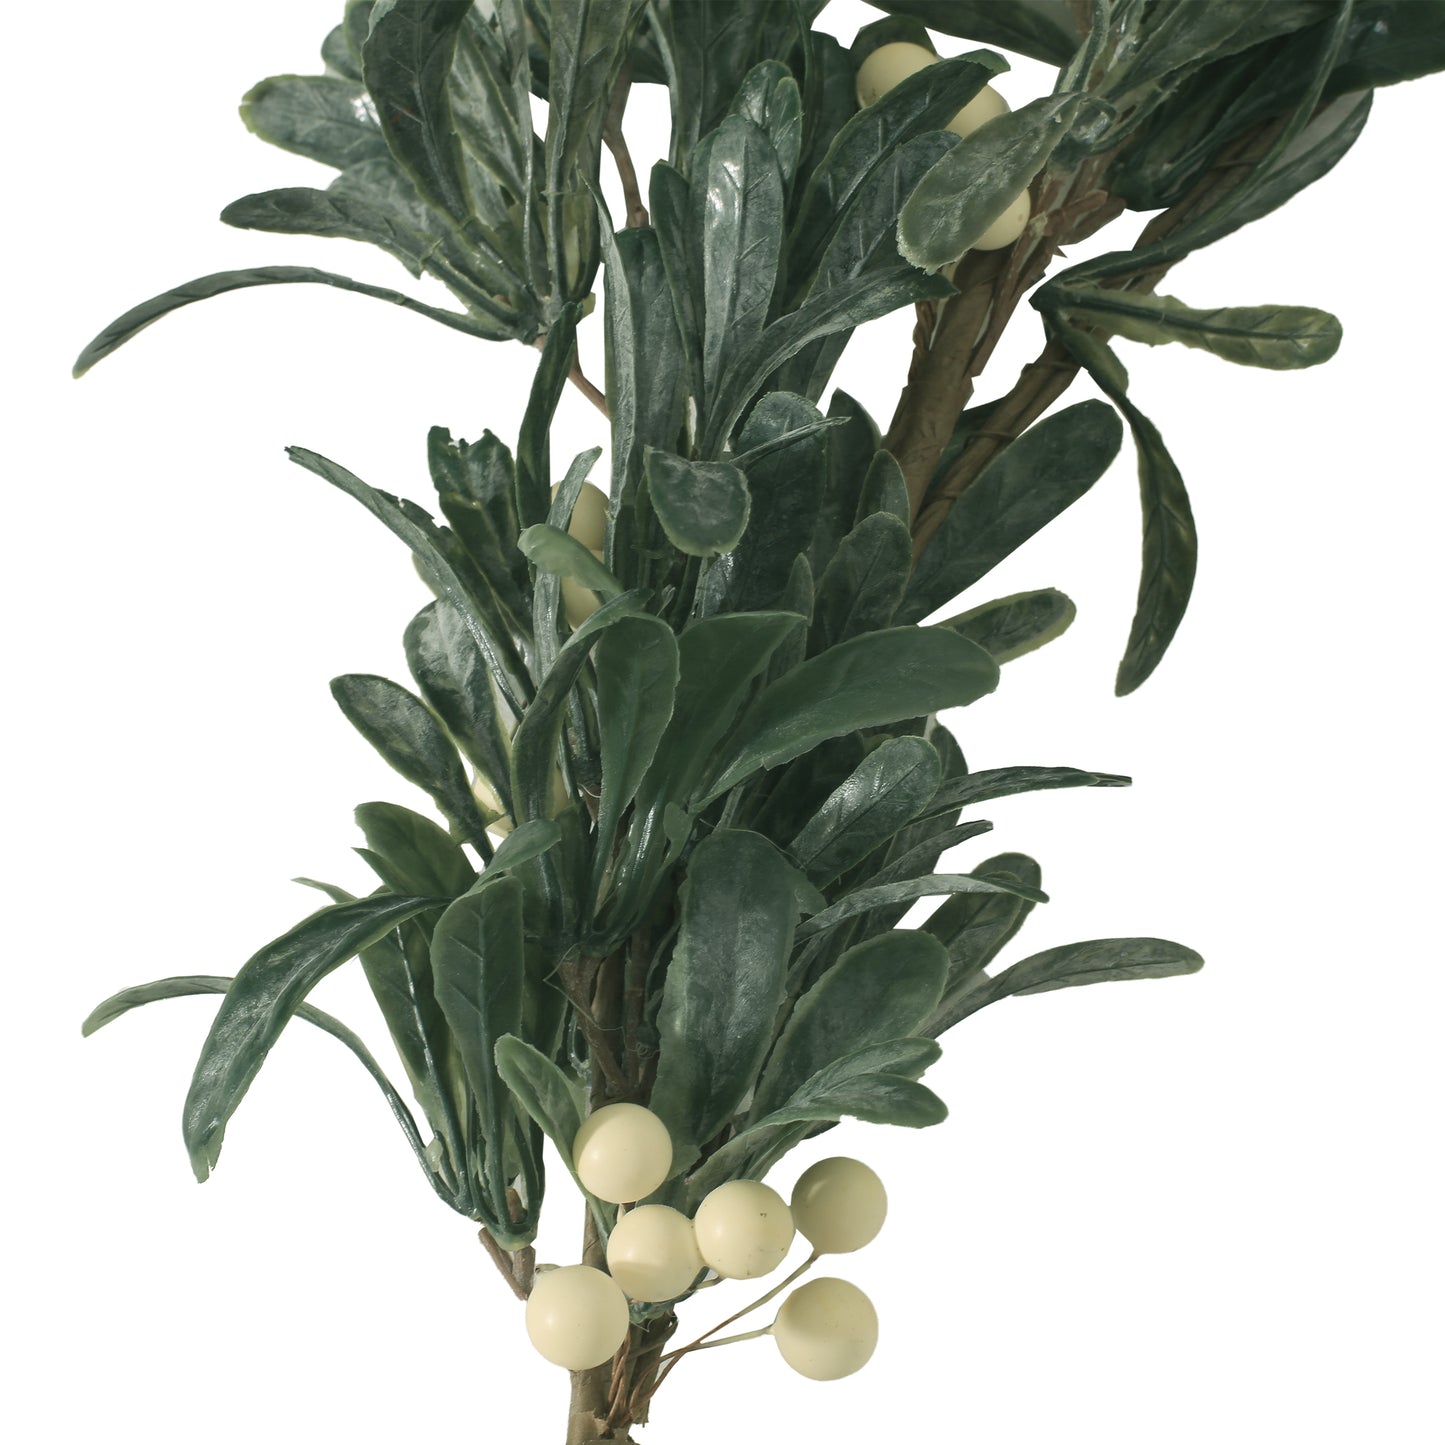 Mina 4.5-foot Snowberry Artificial Garland, Green and White